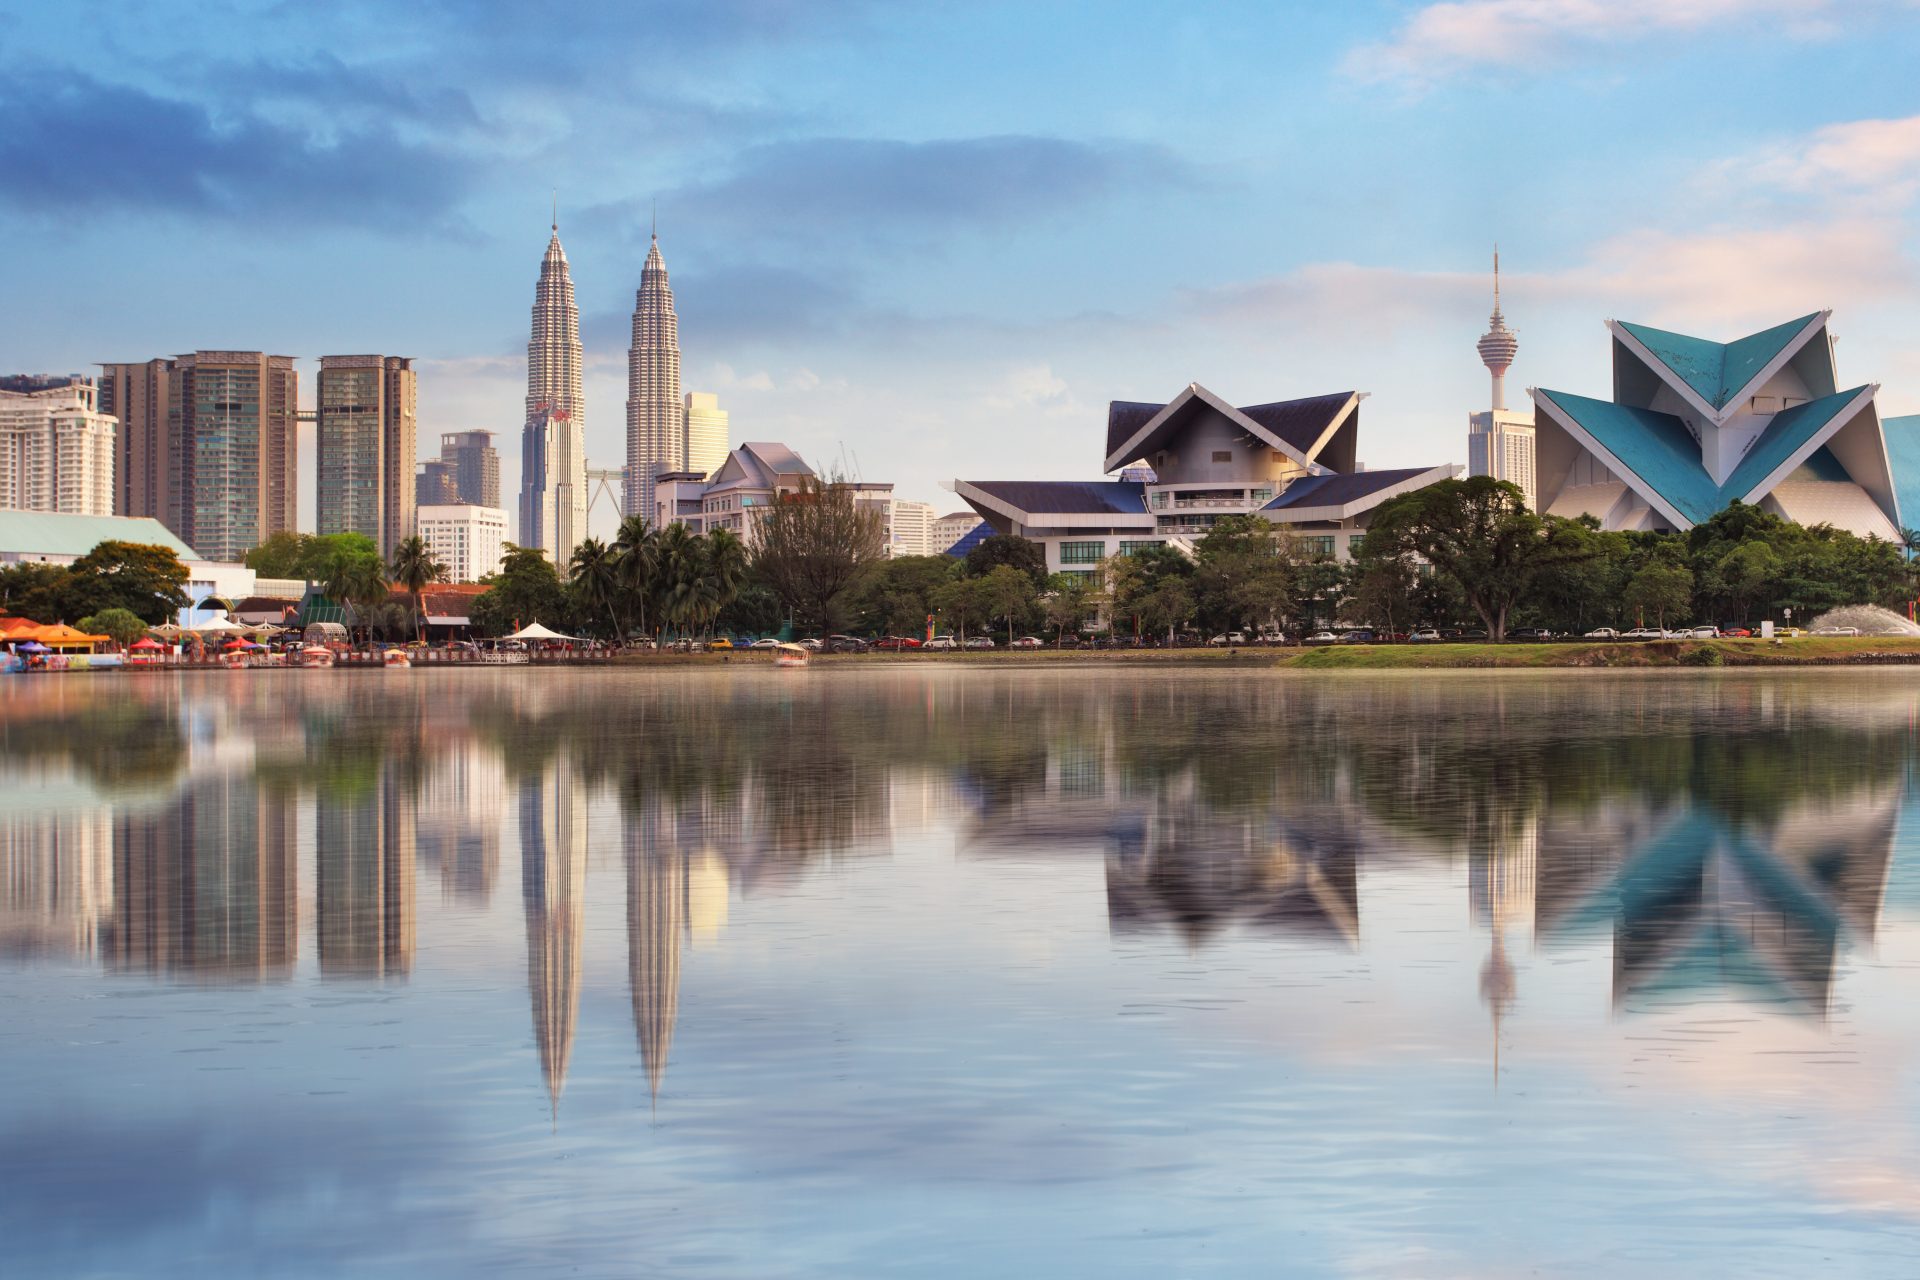 The images shows the skyline of Kuala Lumpur.